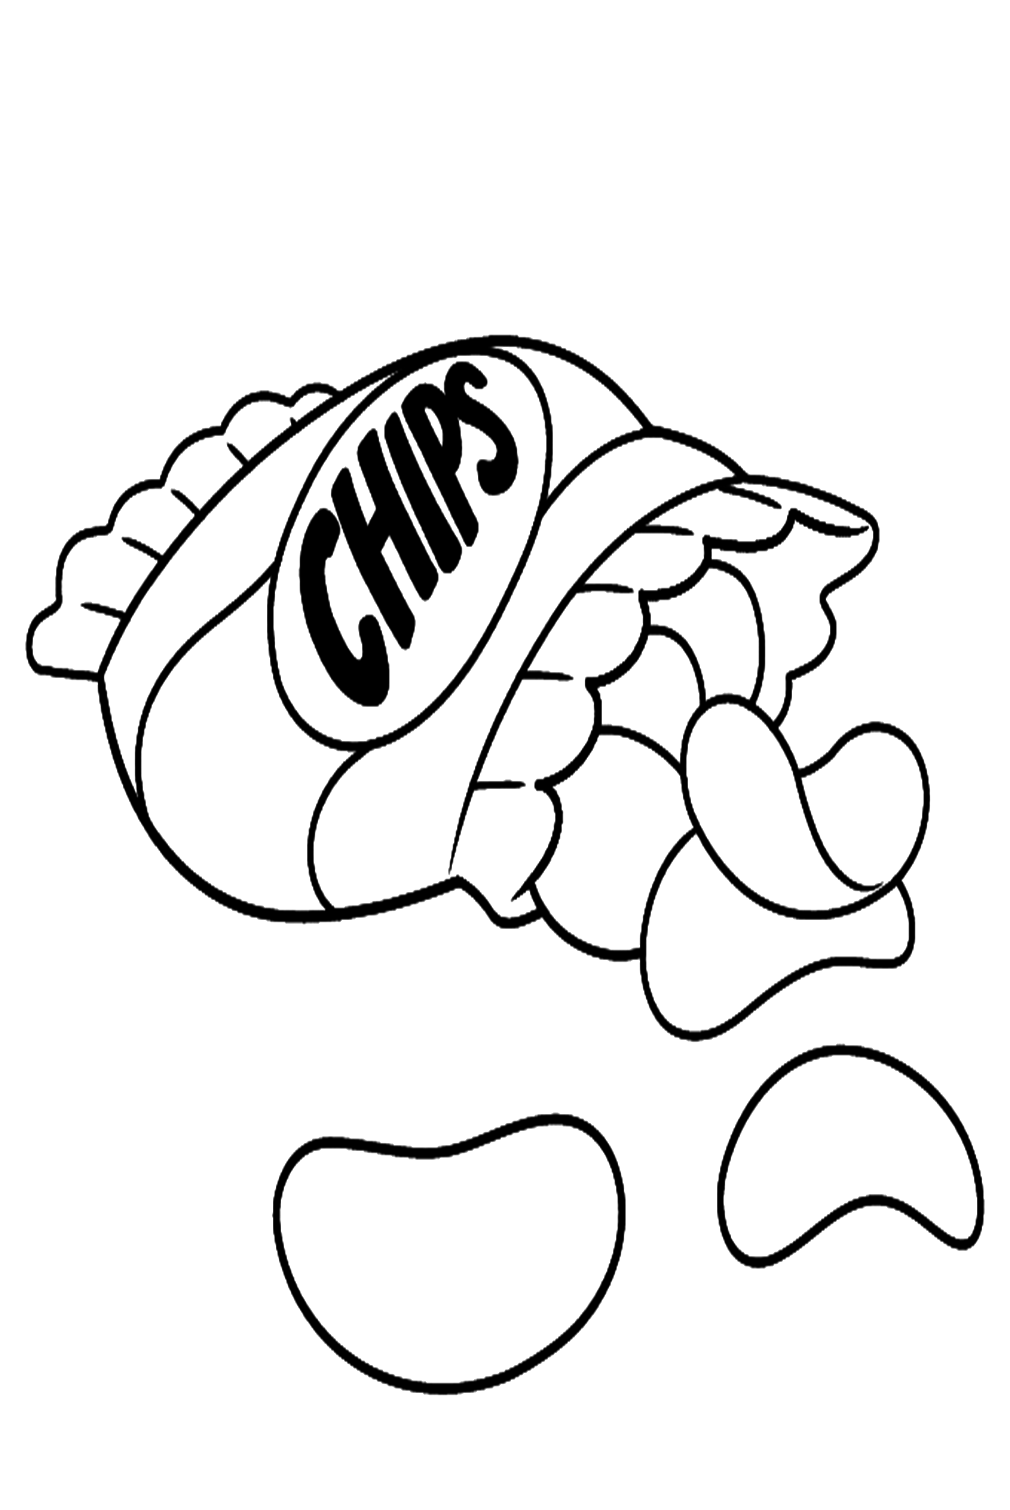 Potato Chips Coloring Page from Potato